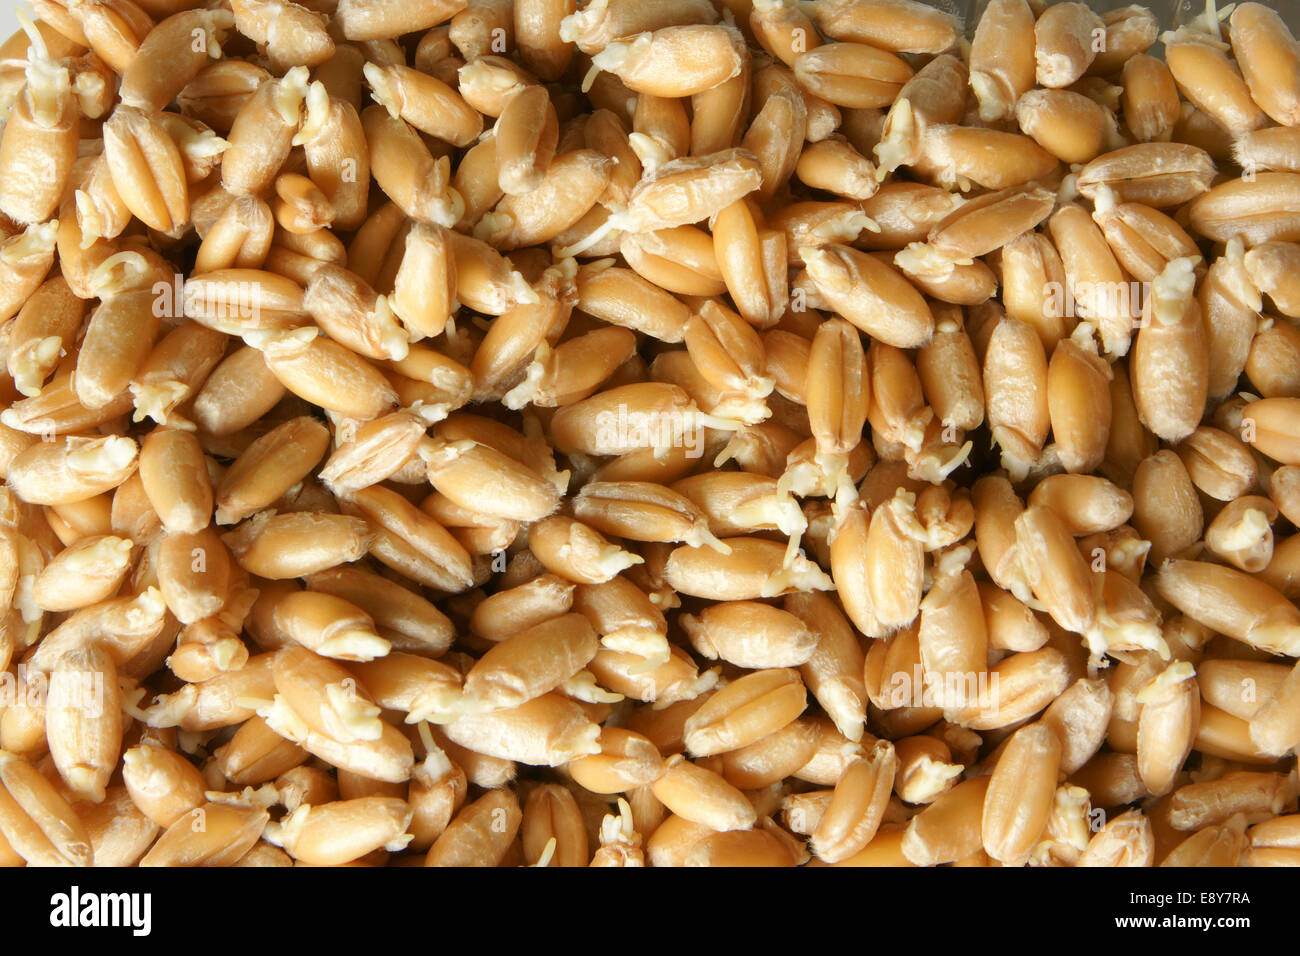 Wheat germs background Stock Photo